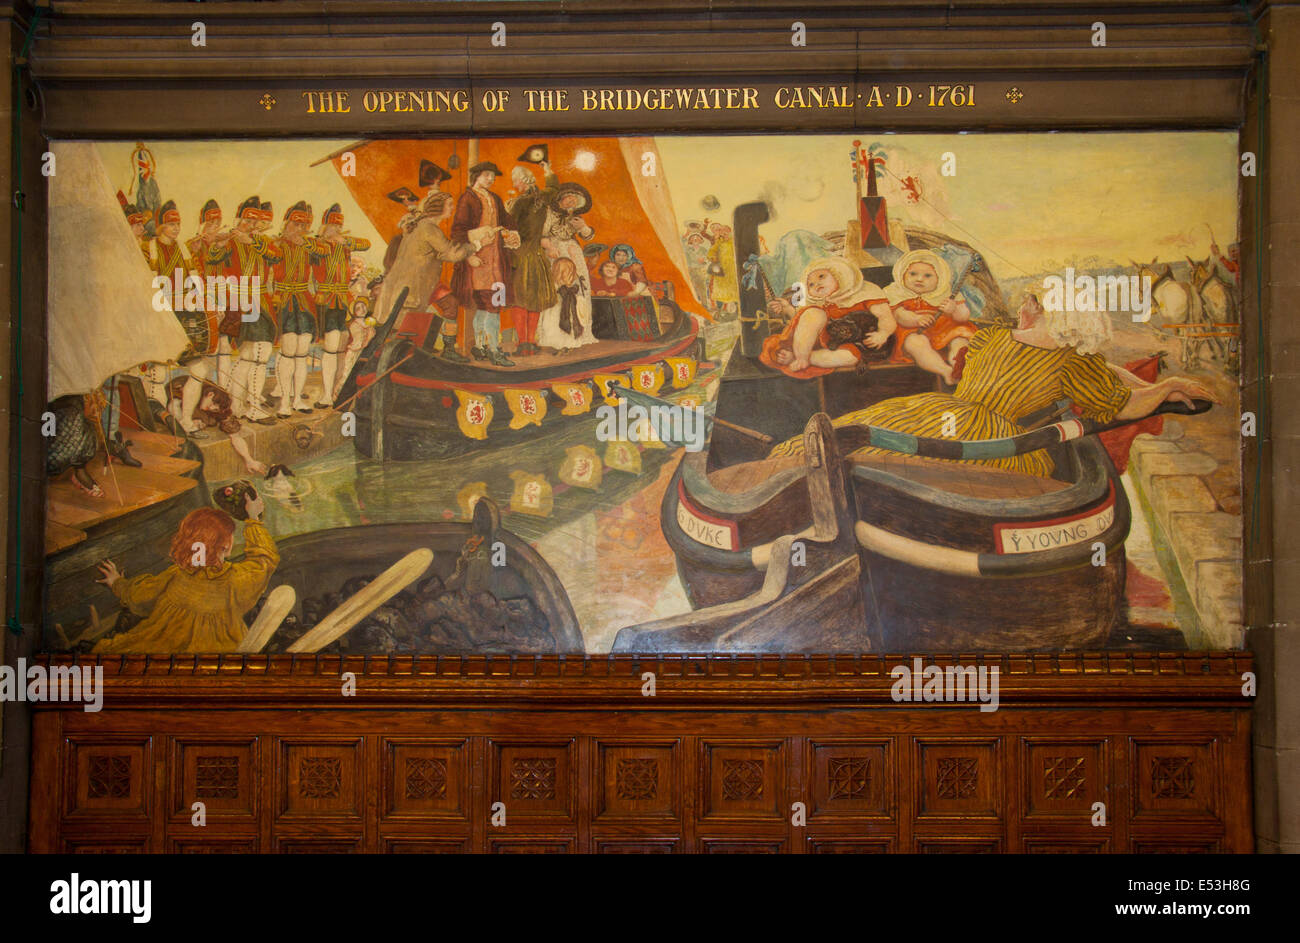 Manchester Town Hall Interior, showing the opening of the Bridgewater Canal, one of 12 murals in the Great Hall. Stock Photo